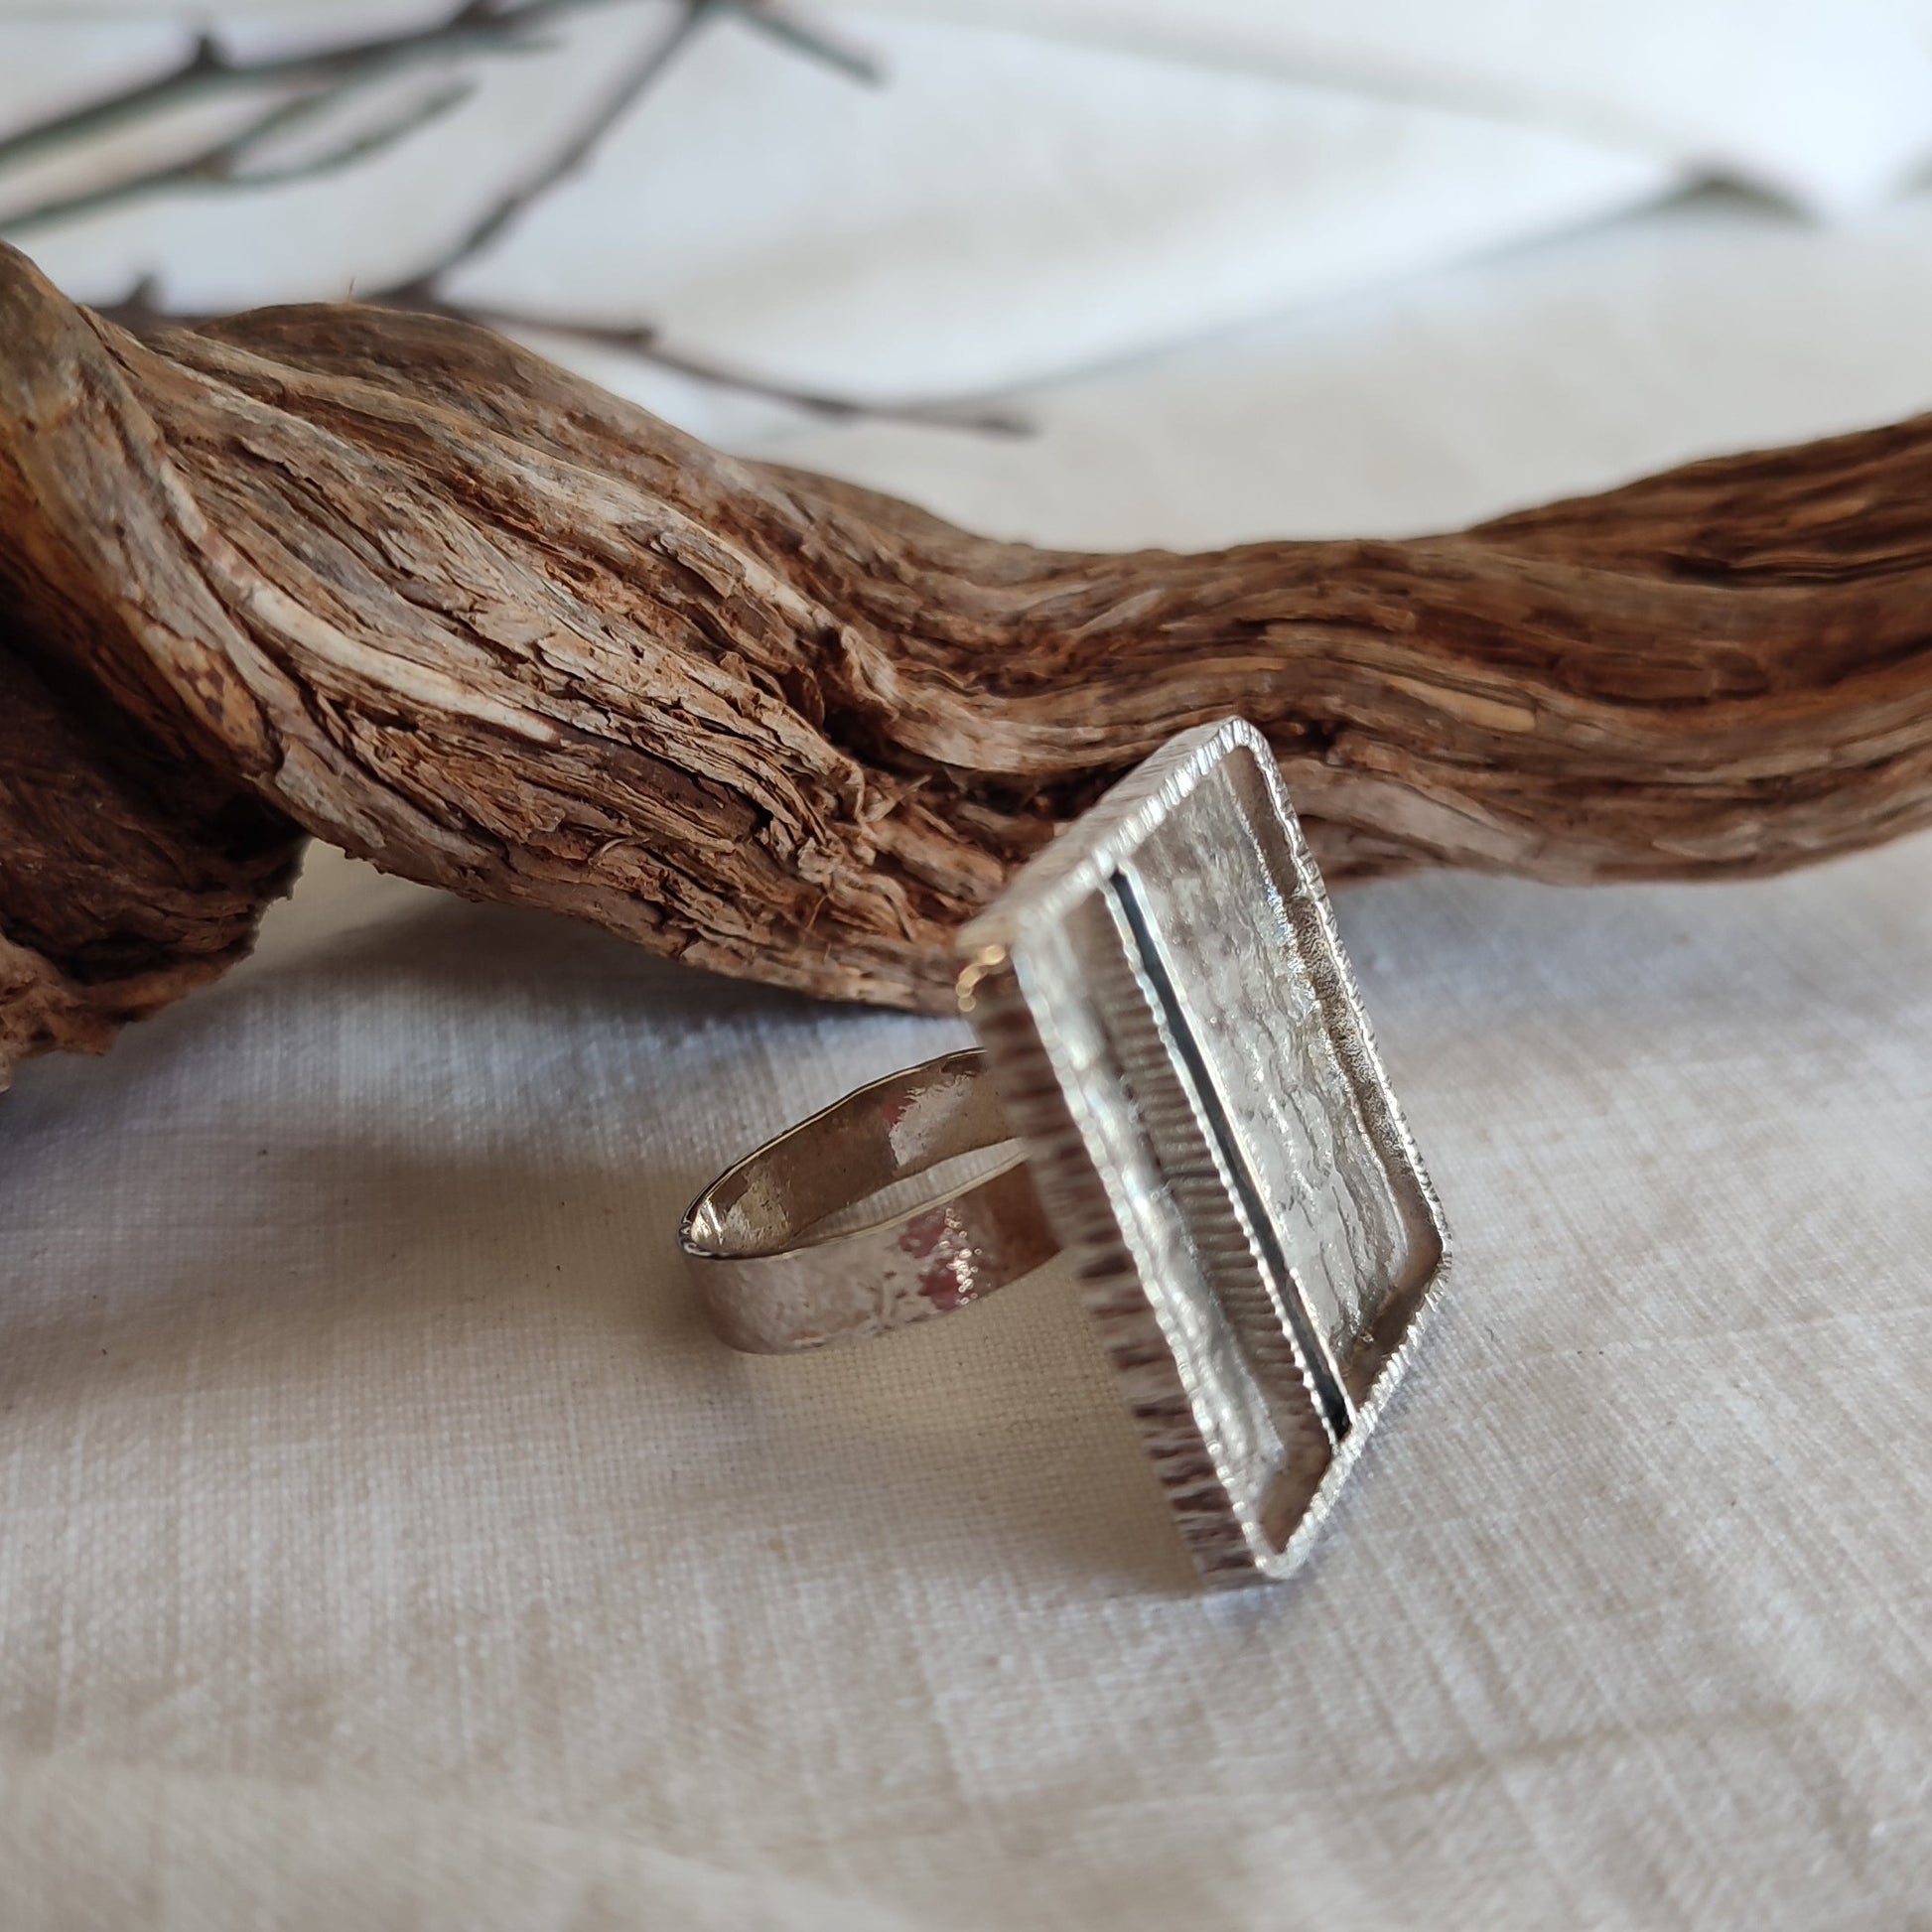 Silver square ring